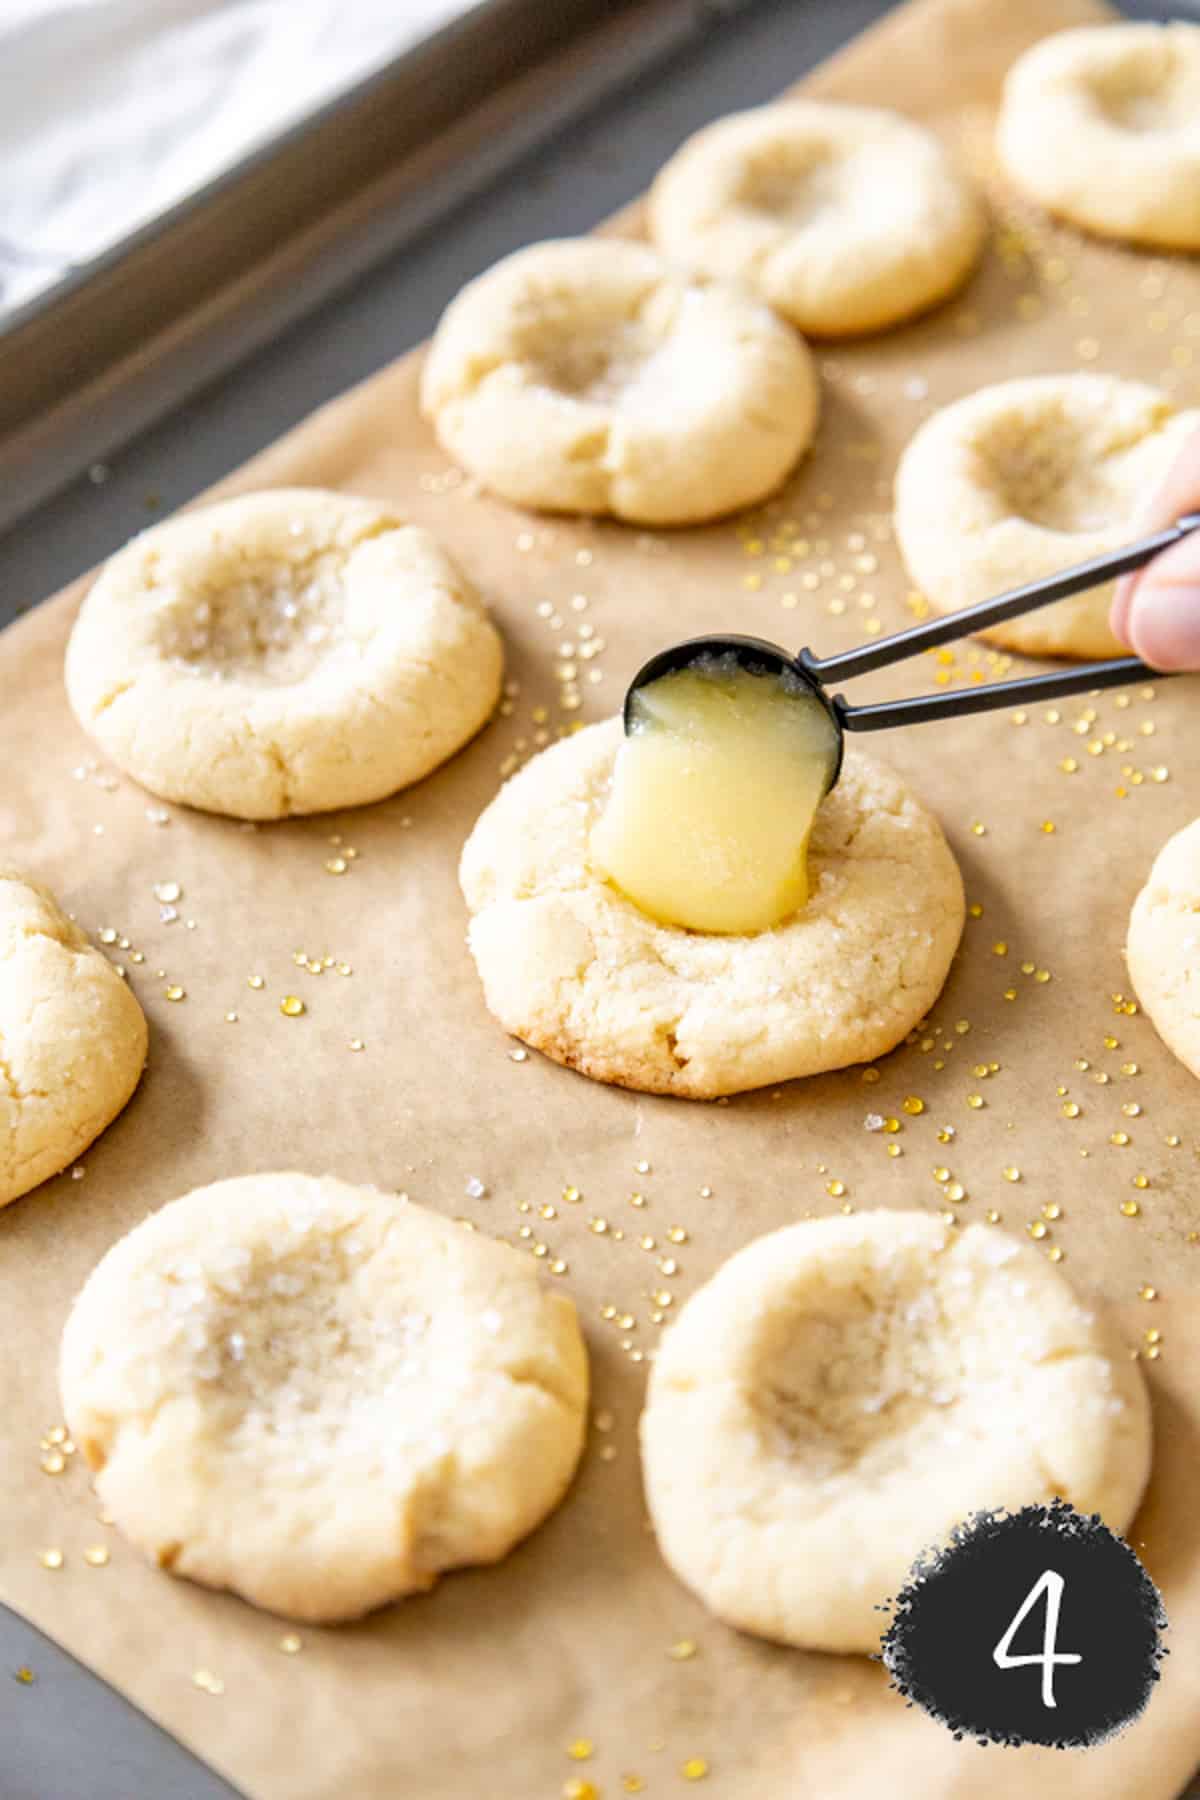 A cookie sheet with sugar cookies with indentations in the centers and a hand dropping lemon curd in the center of one of the cookies with a black measuring spoon.